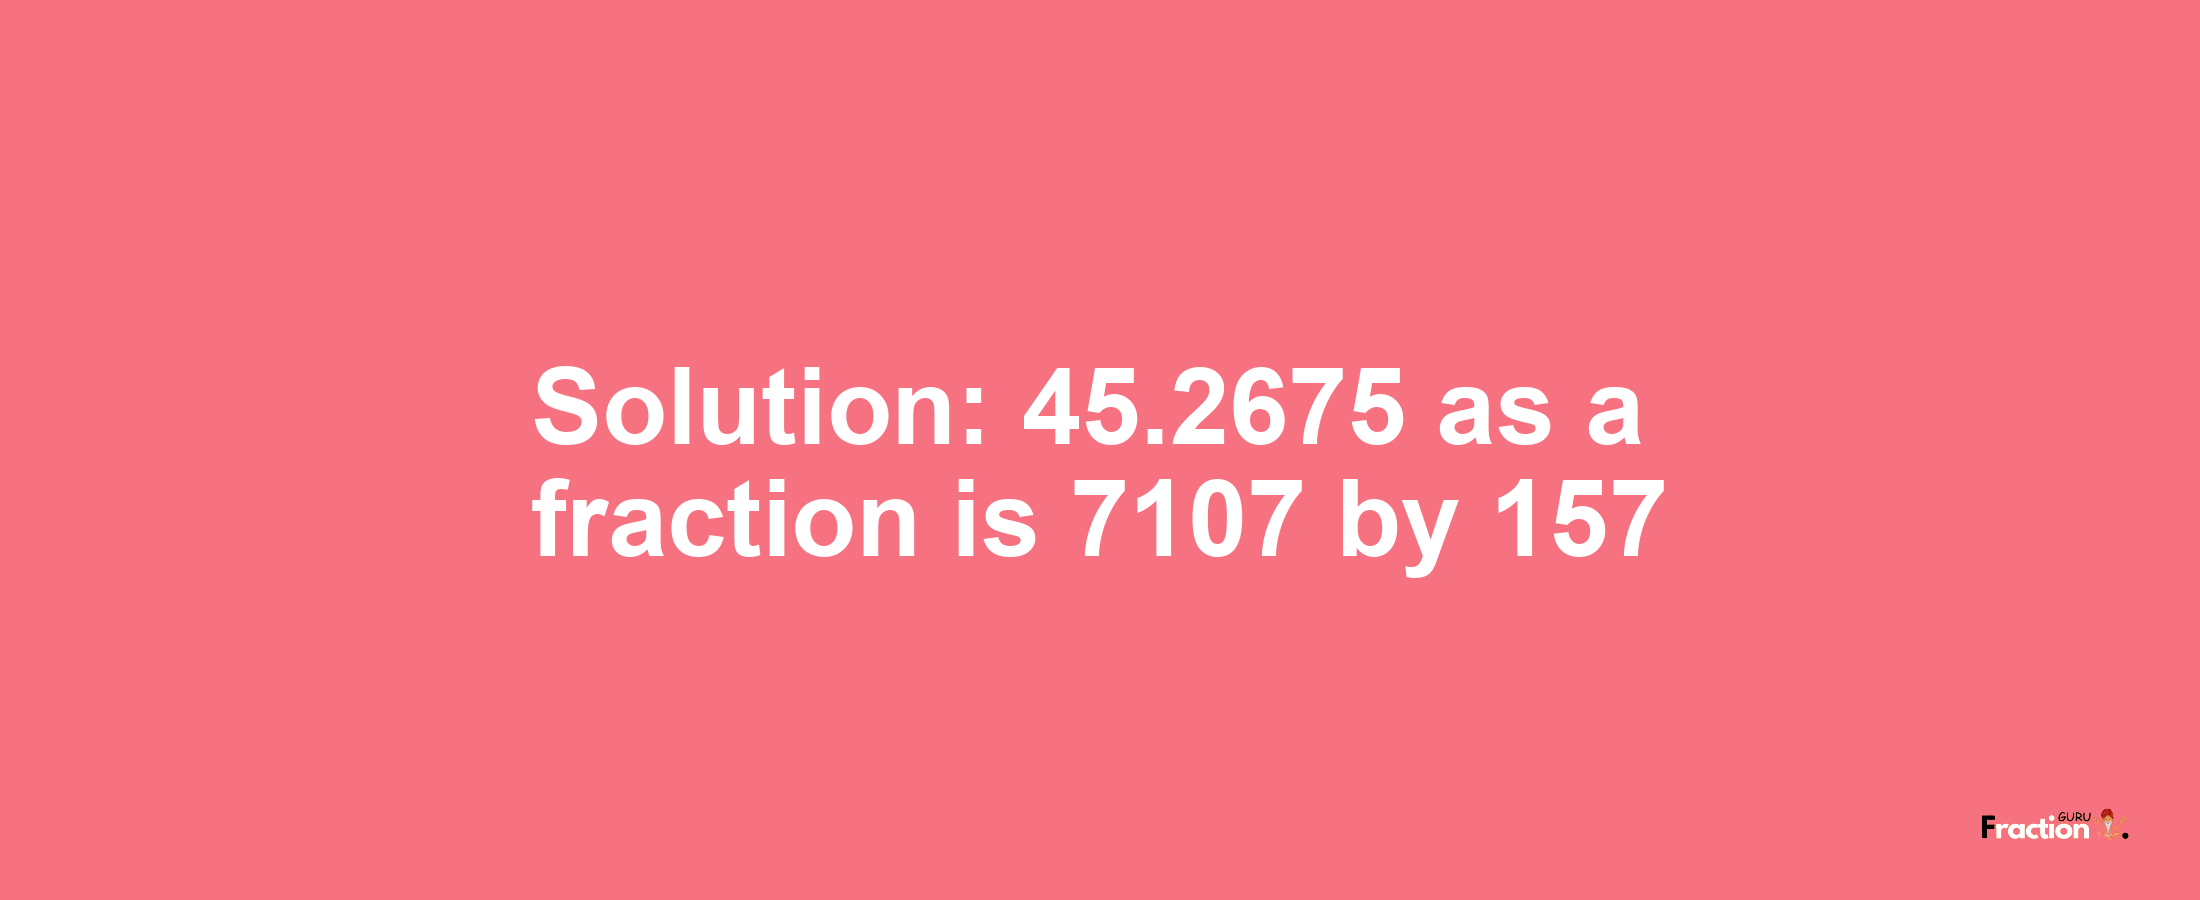 Solution:45.2675 as a fraction is 7107/157